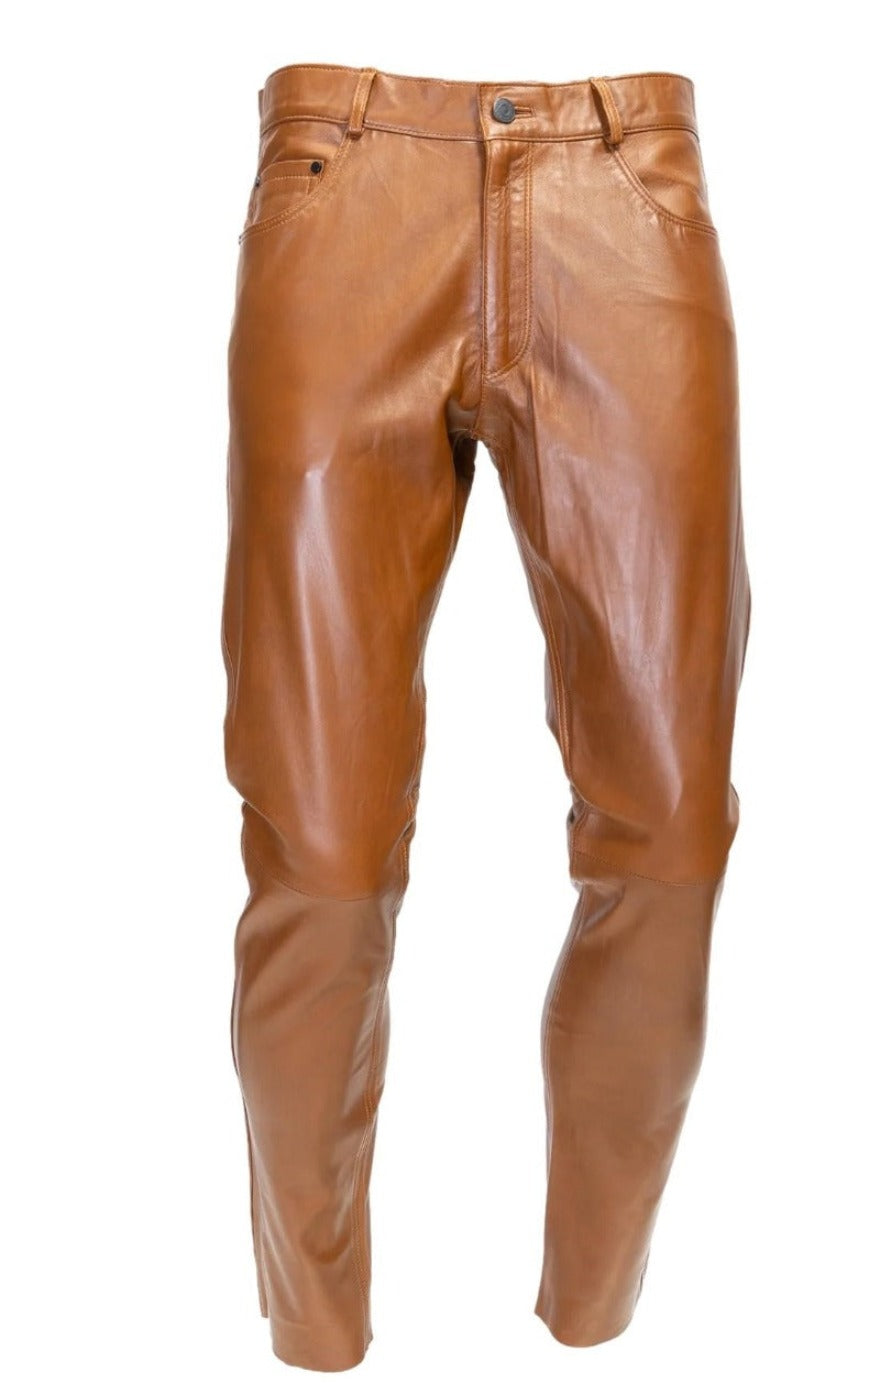 Photo of our Brown Leather Jeans, front view